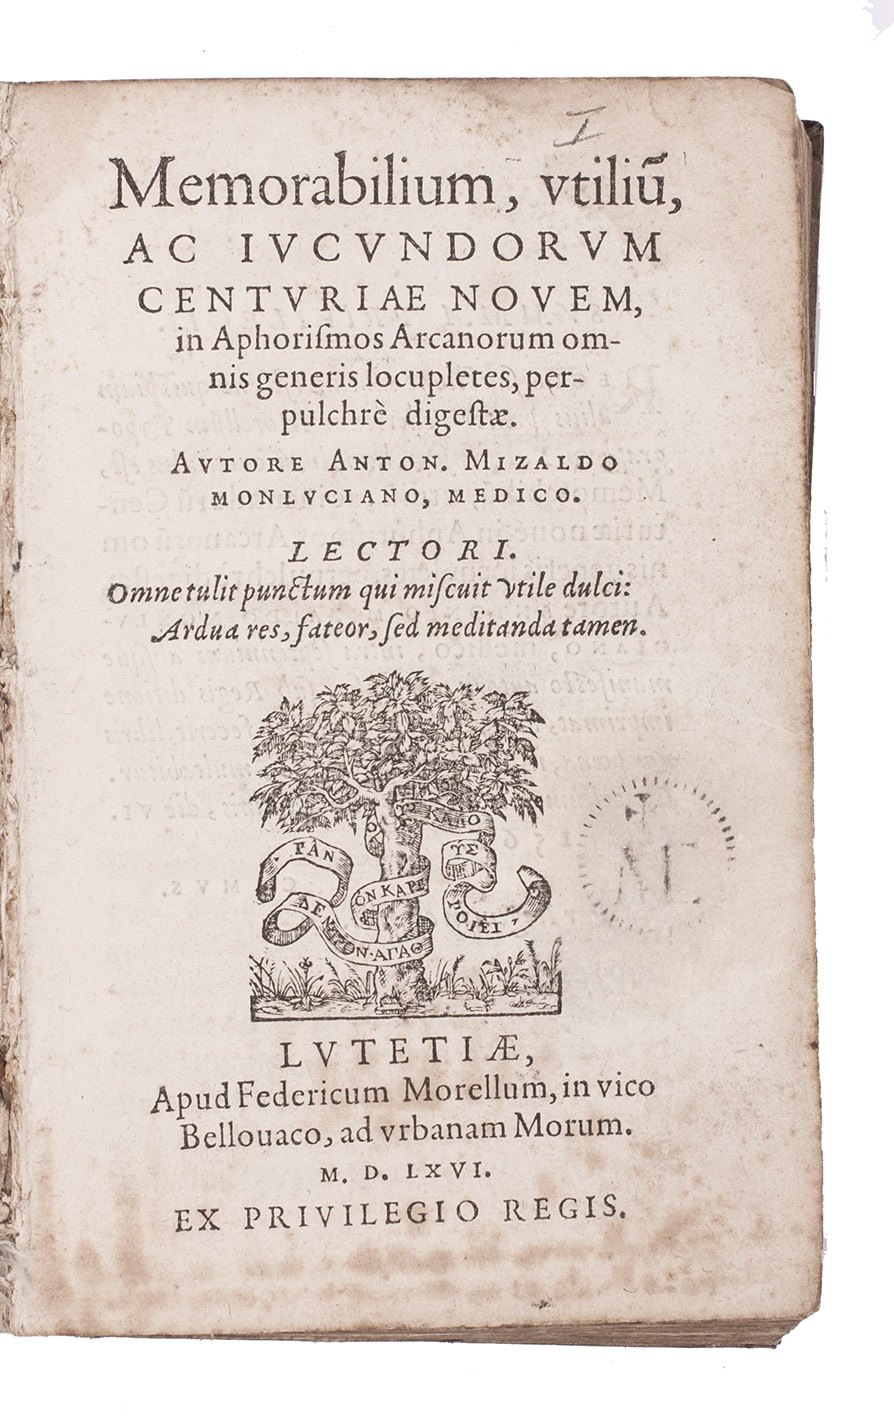 MIZAULD, Antoine. - Memorabilium, utiliu[m], ac jucundorum centuriae novem, in aphorismos arcanorum omnis generis locupletes, perpulchr digestae. Paris, Fdric Morel, 1566. 8vo. With Morel's woodcut tree device on the title-page, 2 woodcut headpieces and 7 woodcut decorated initials (plus 3 repeats), the headpieces and initials in an unusually delicate design, finely executed. Set in italic types with the preliminaries in roman, and incidental Greek. 17th-century limp sheepskin parchment.